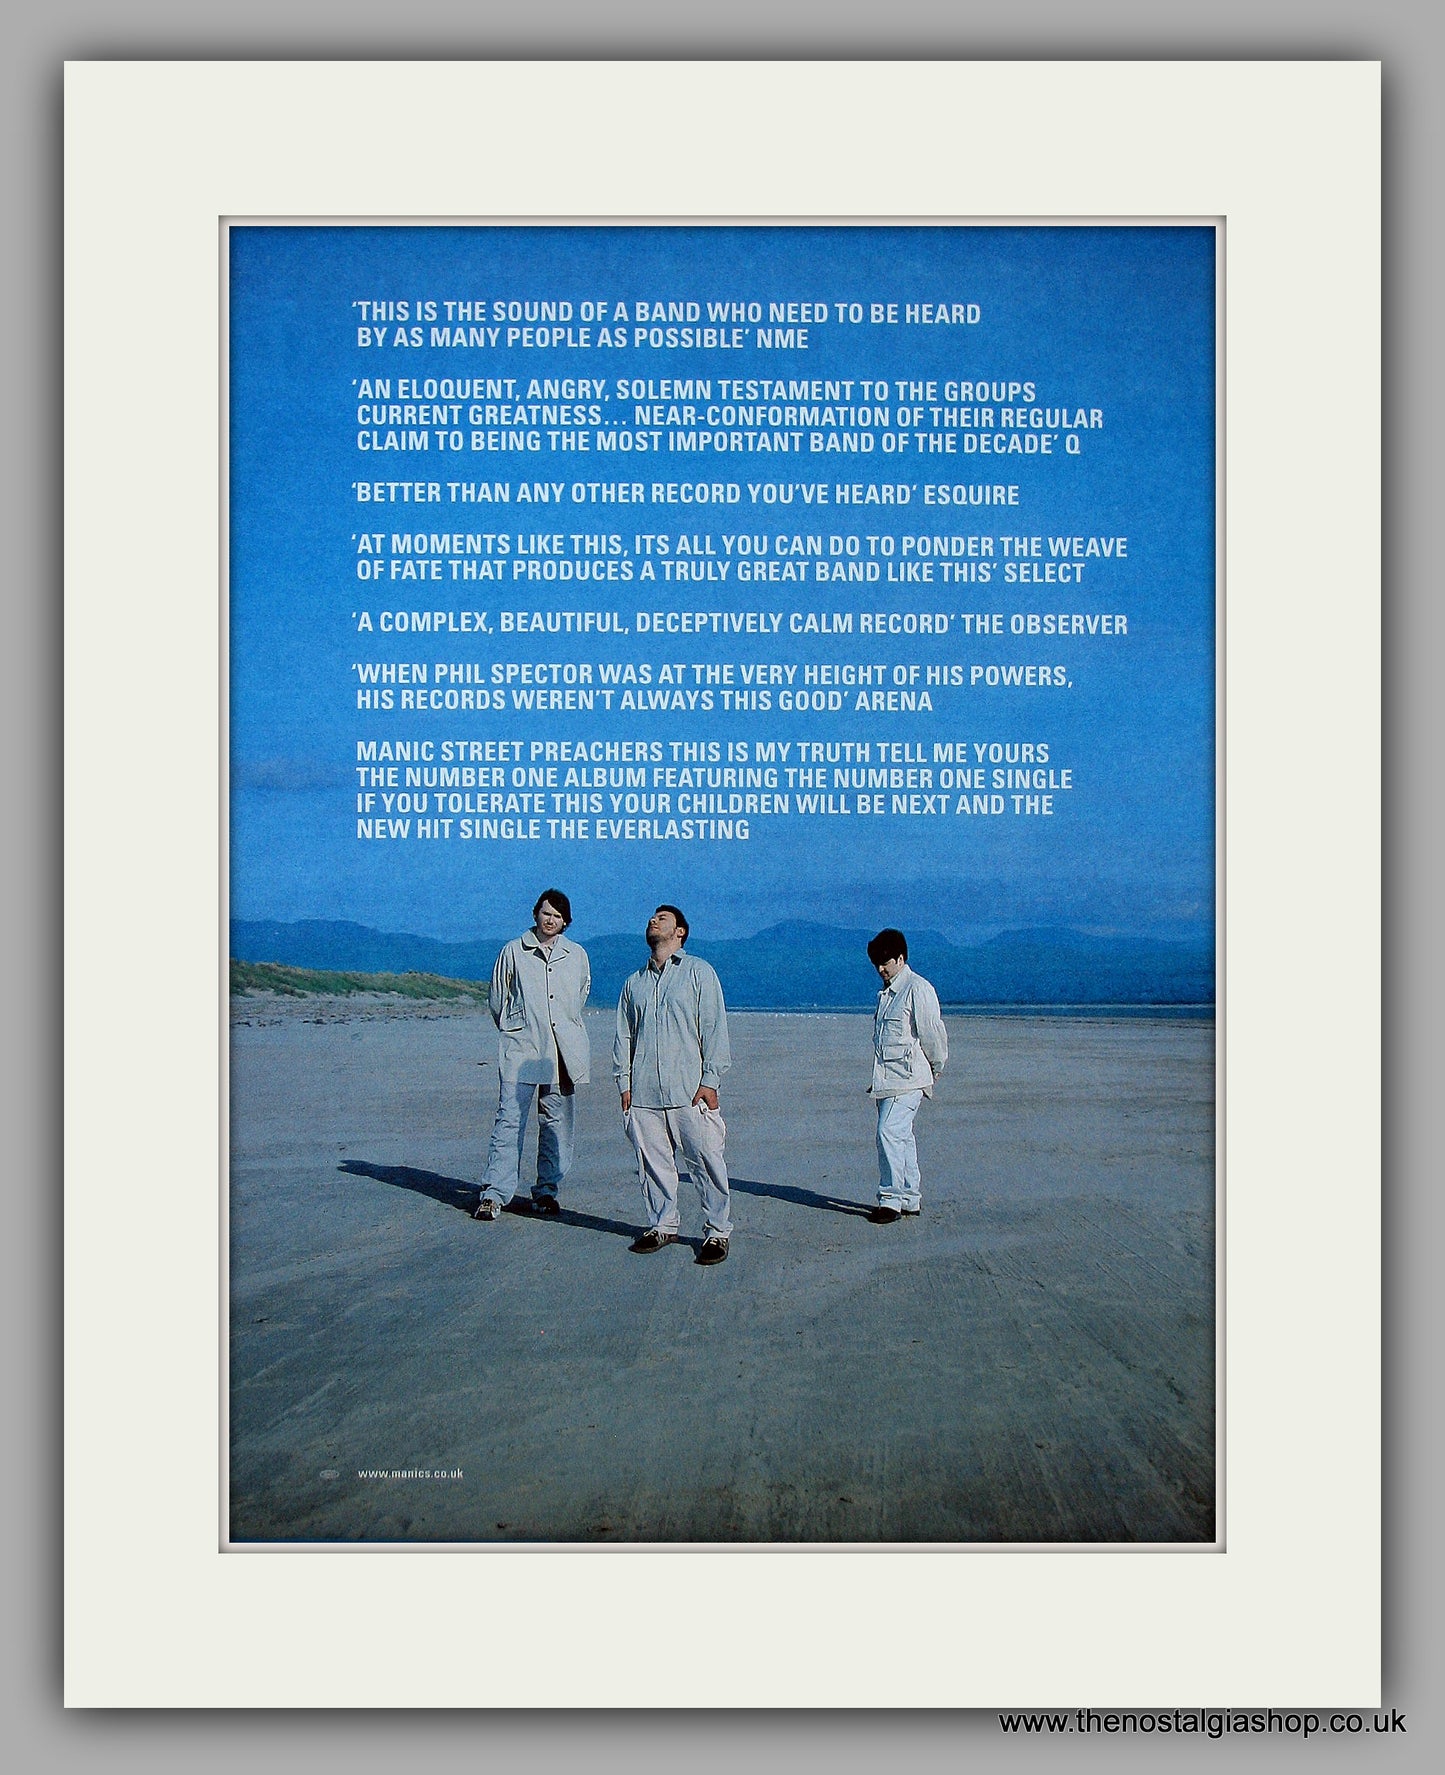 Manic Street Preachers - This Is My Truth Tell Me Yours. Original Vintage Advert 1998 (ref AD10902)